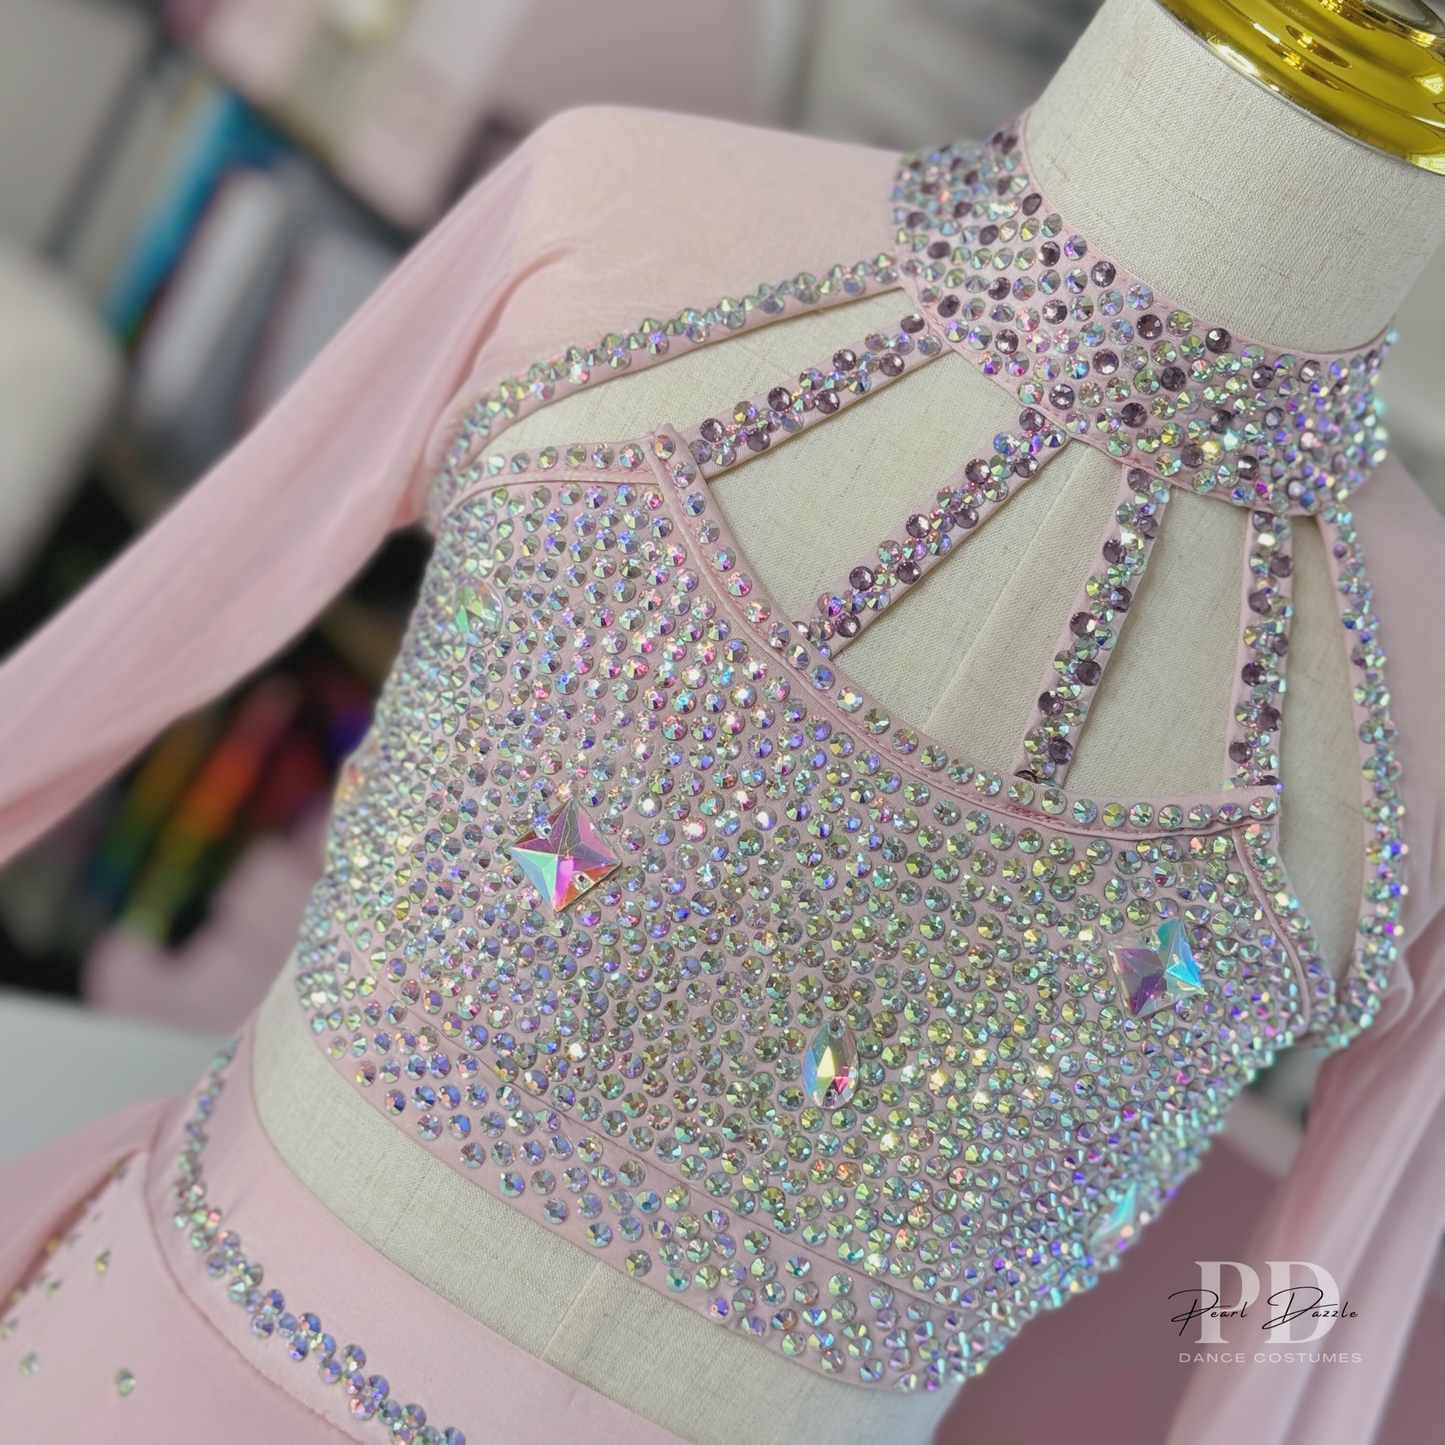 Ready to ship 7/8Y Dreamy Pink Customized Lyrical Dance Costume